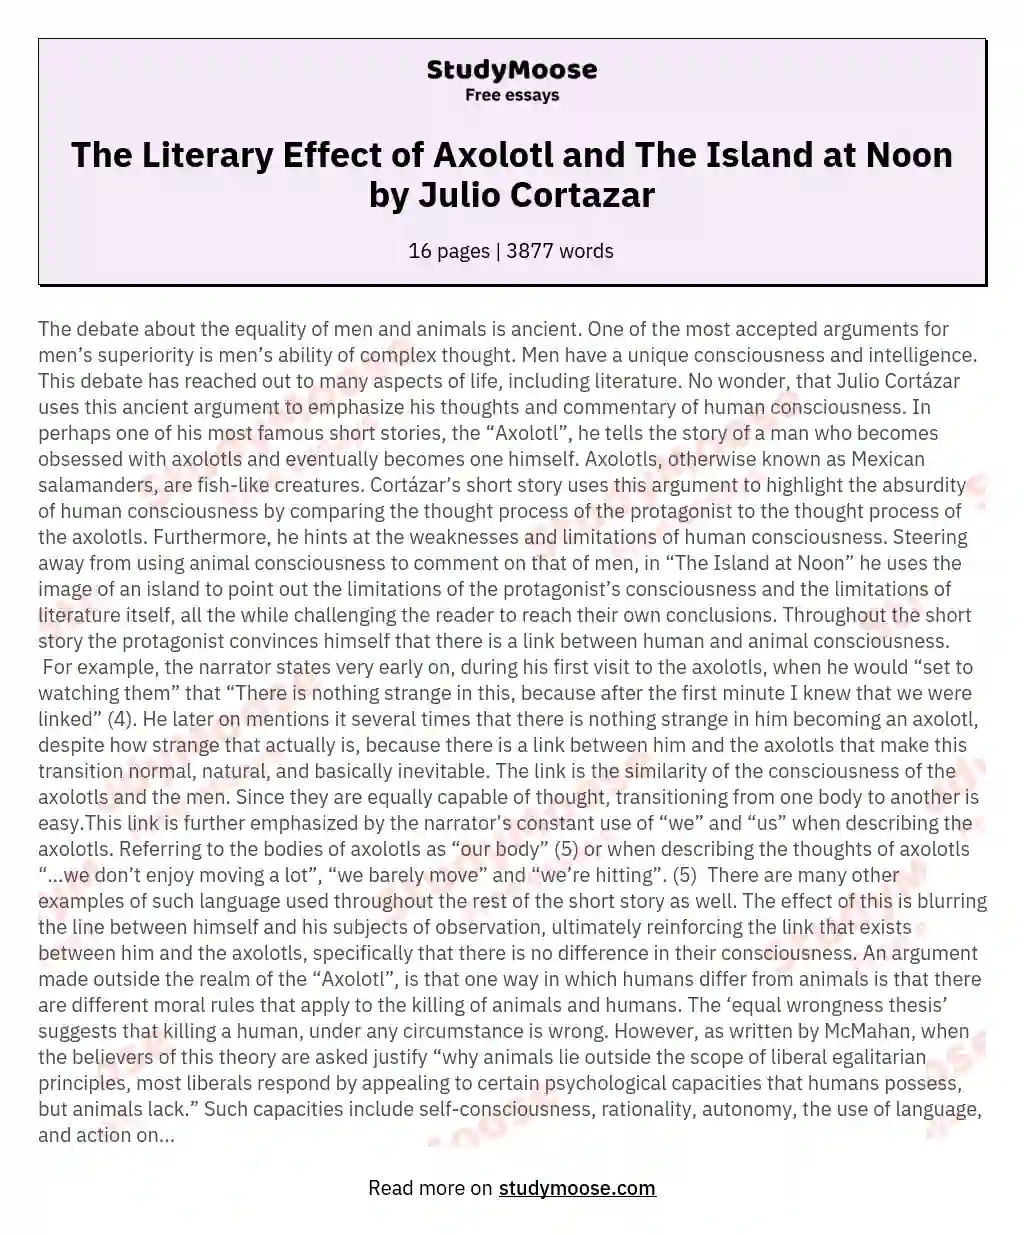 The Literary Effect of Axolotl and The Island at Noon by Julio Cortazar